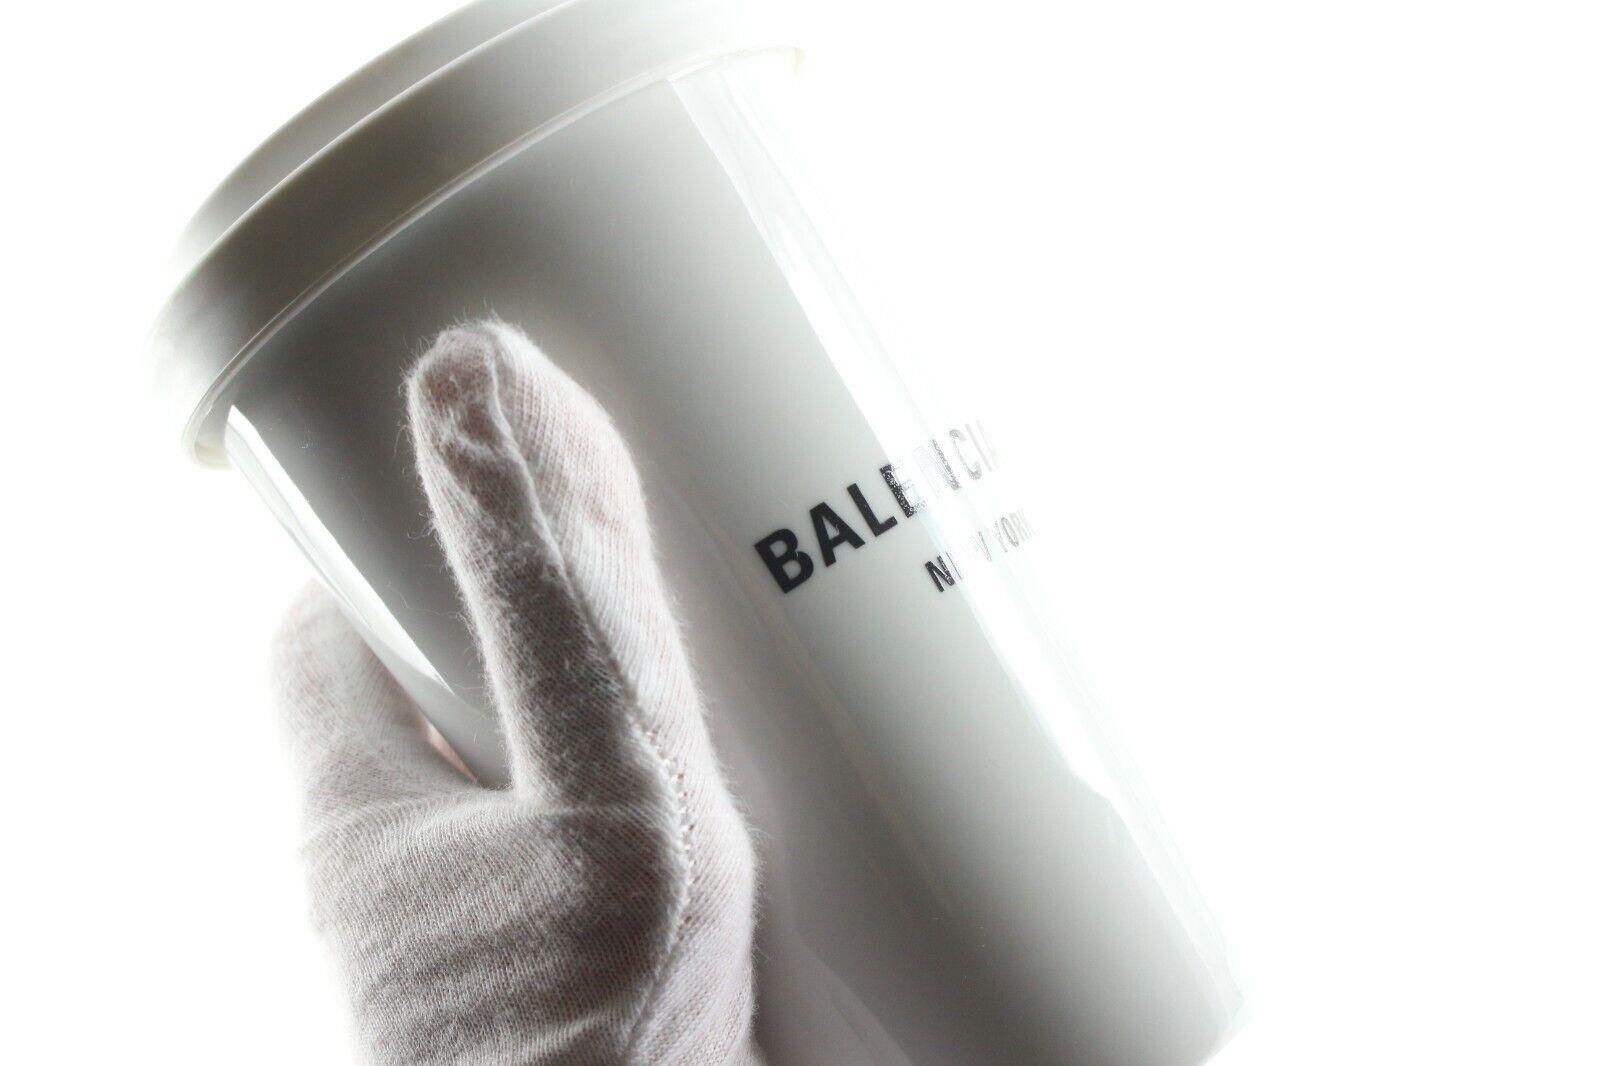 Balenciaga Cities New York Coffee Mug 100% Authentic BNIB 2BA523K In New Condition For Sale In Dix hills, NY